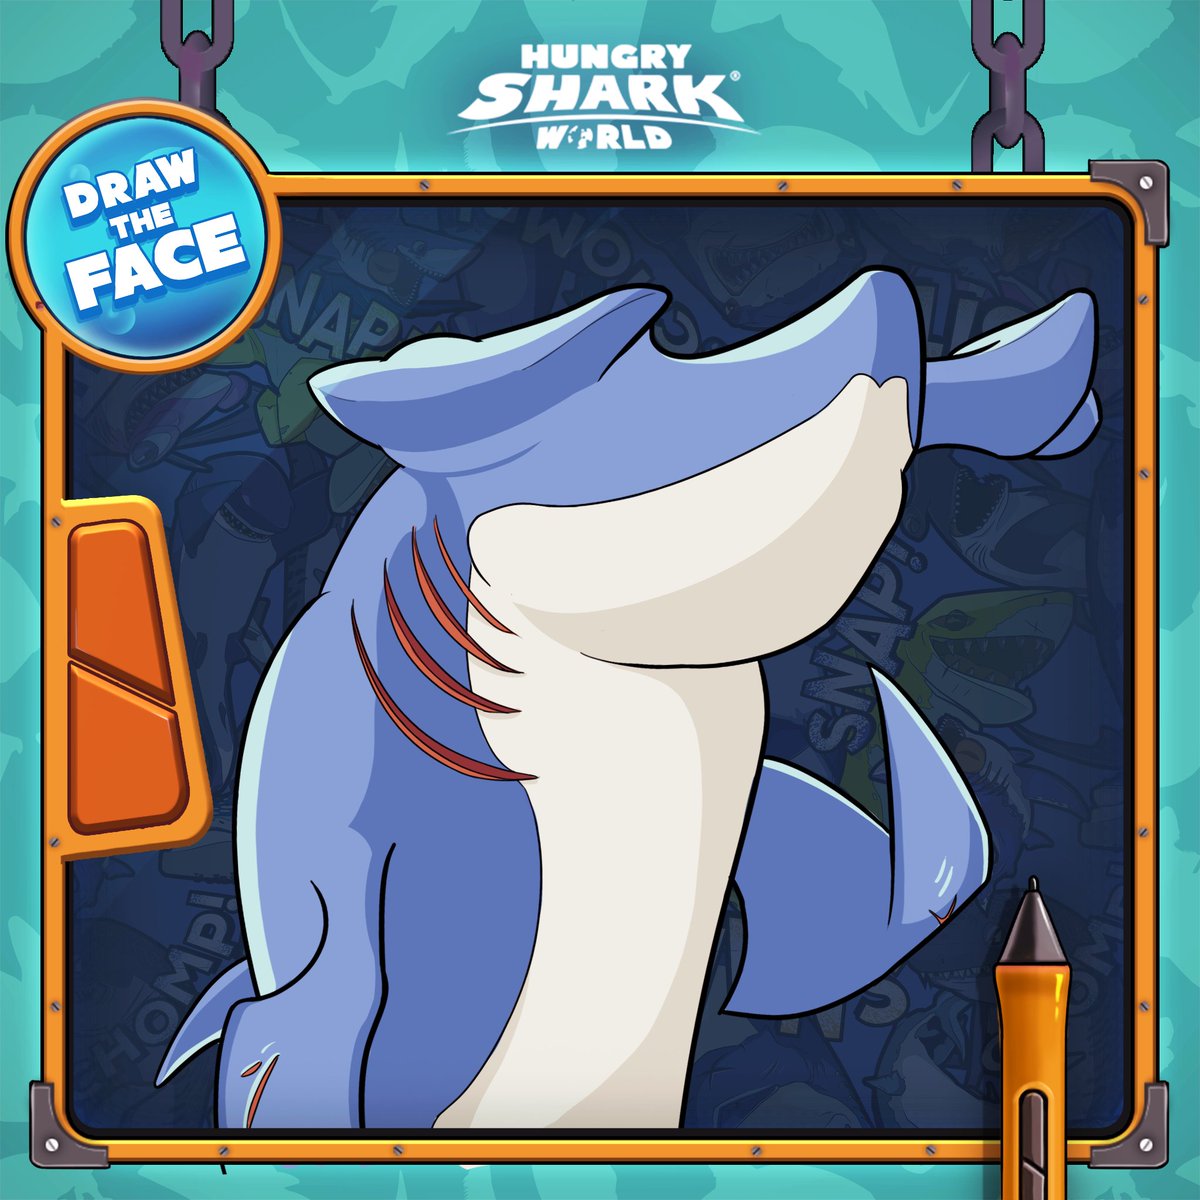 The Great Hammerhead is feeling adventurous! 👀 How about sketching a fresh face for our aquatic friend?🤡 Let your creativity flow! 🎨 #HSW #HungrySharkWorld